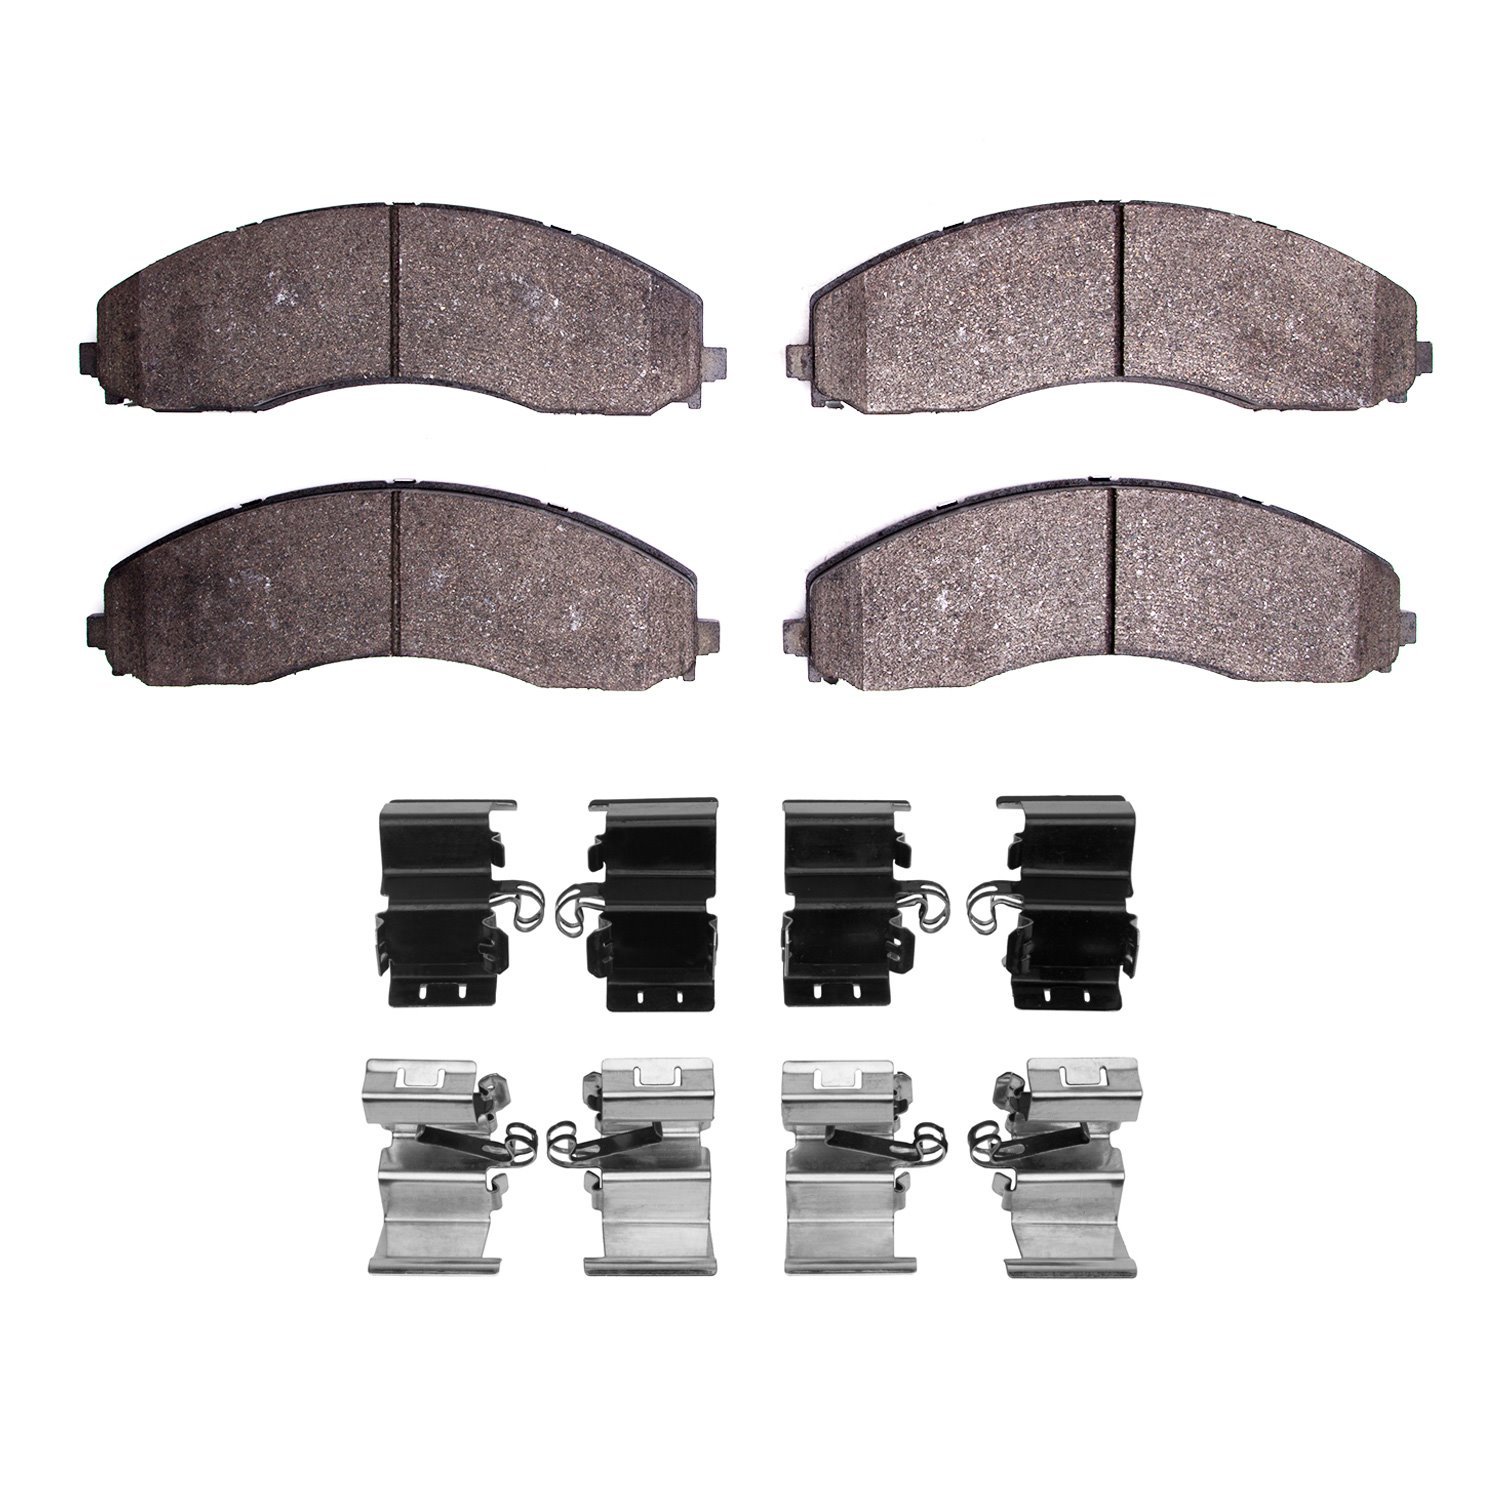 1400-2018-01 Ultimate-Duty Brake Pads & Hardware Kit, Fits Select Ford/Lincoln/Mercury/Mazda, Position: Front,Fr & Rr,Fr,Rear,Rr